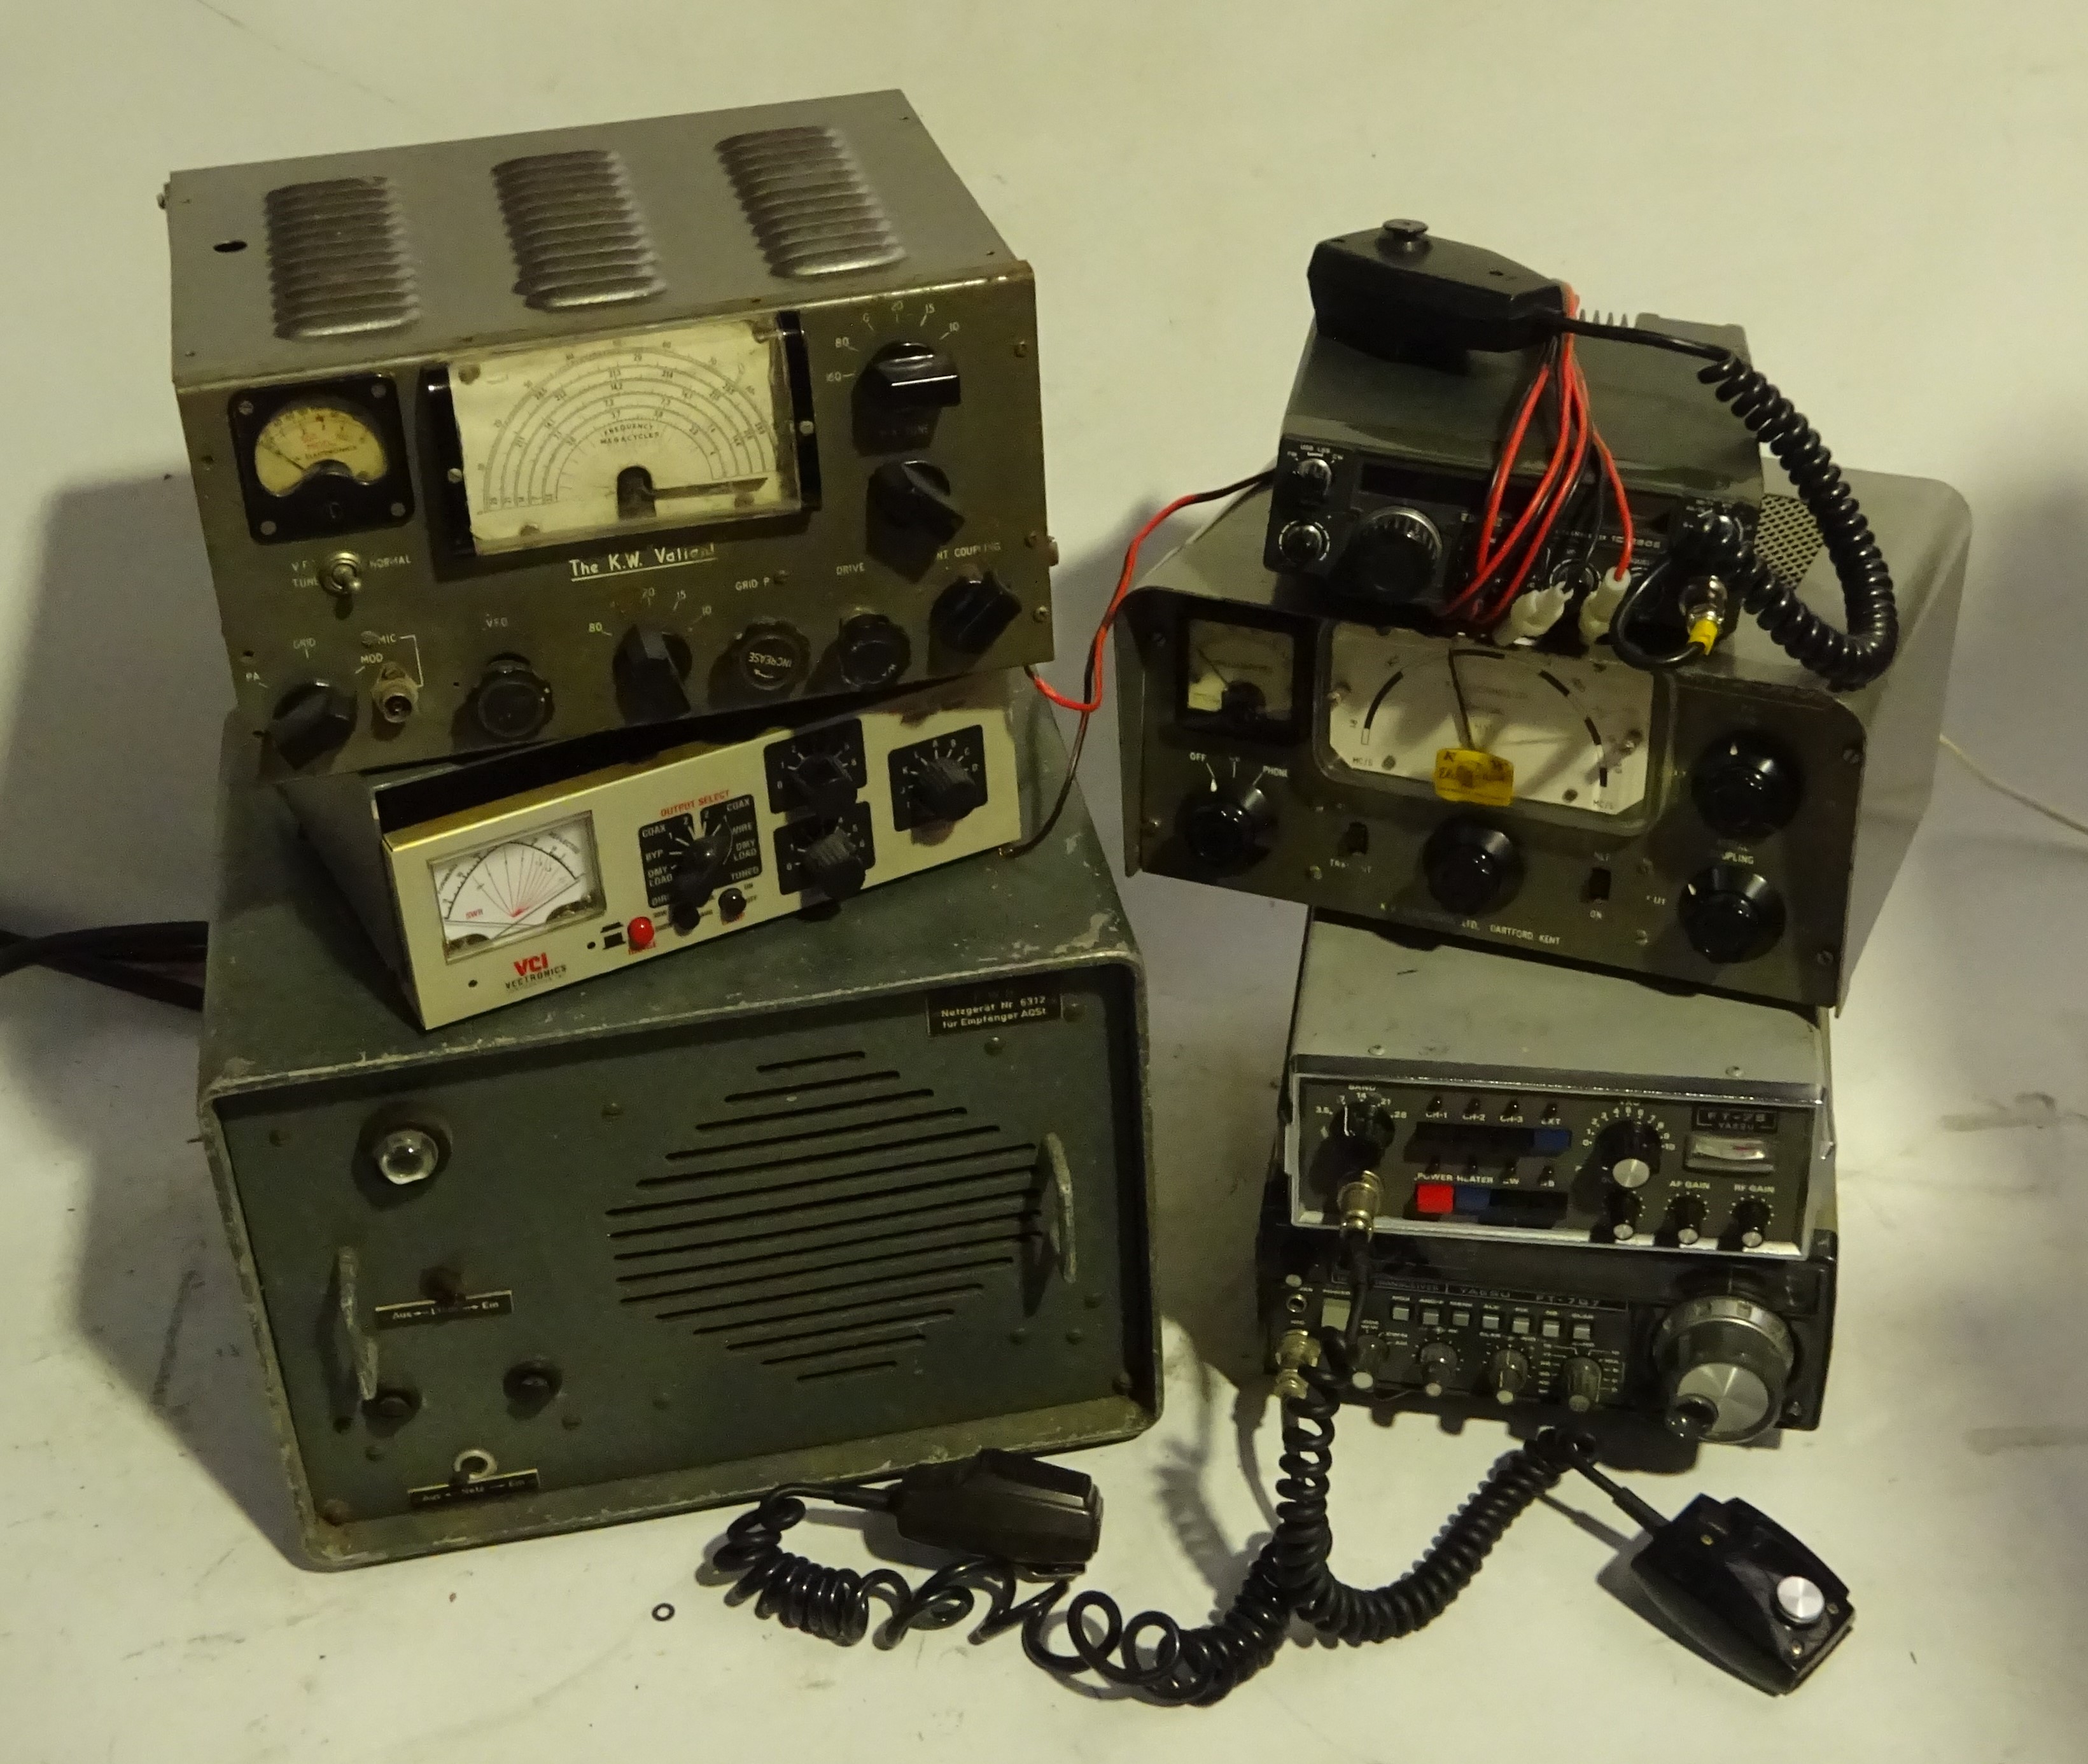 Communication equipment including Yaesu FT-707 and FT075 Transceivers, K.W.